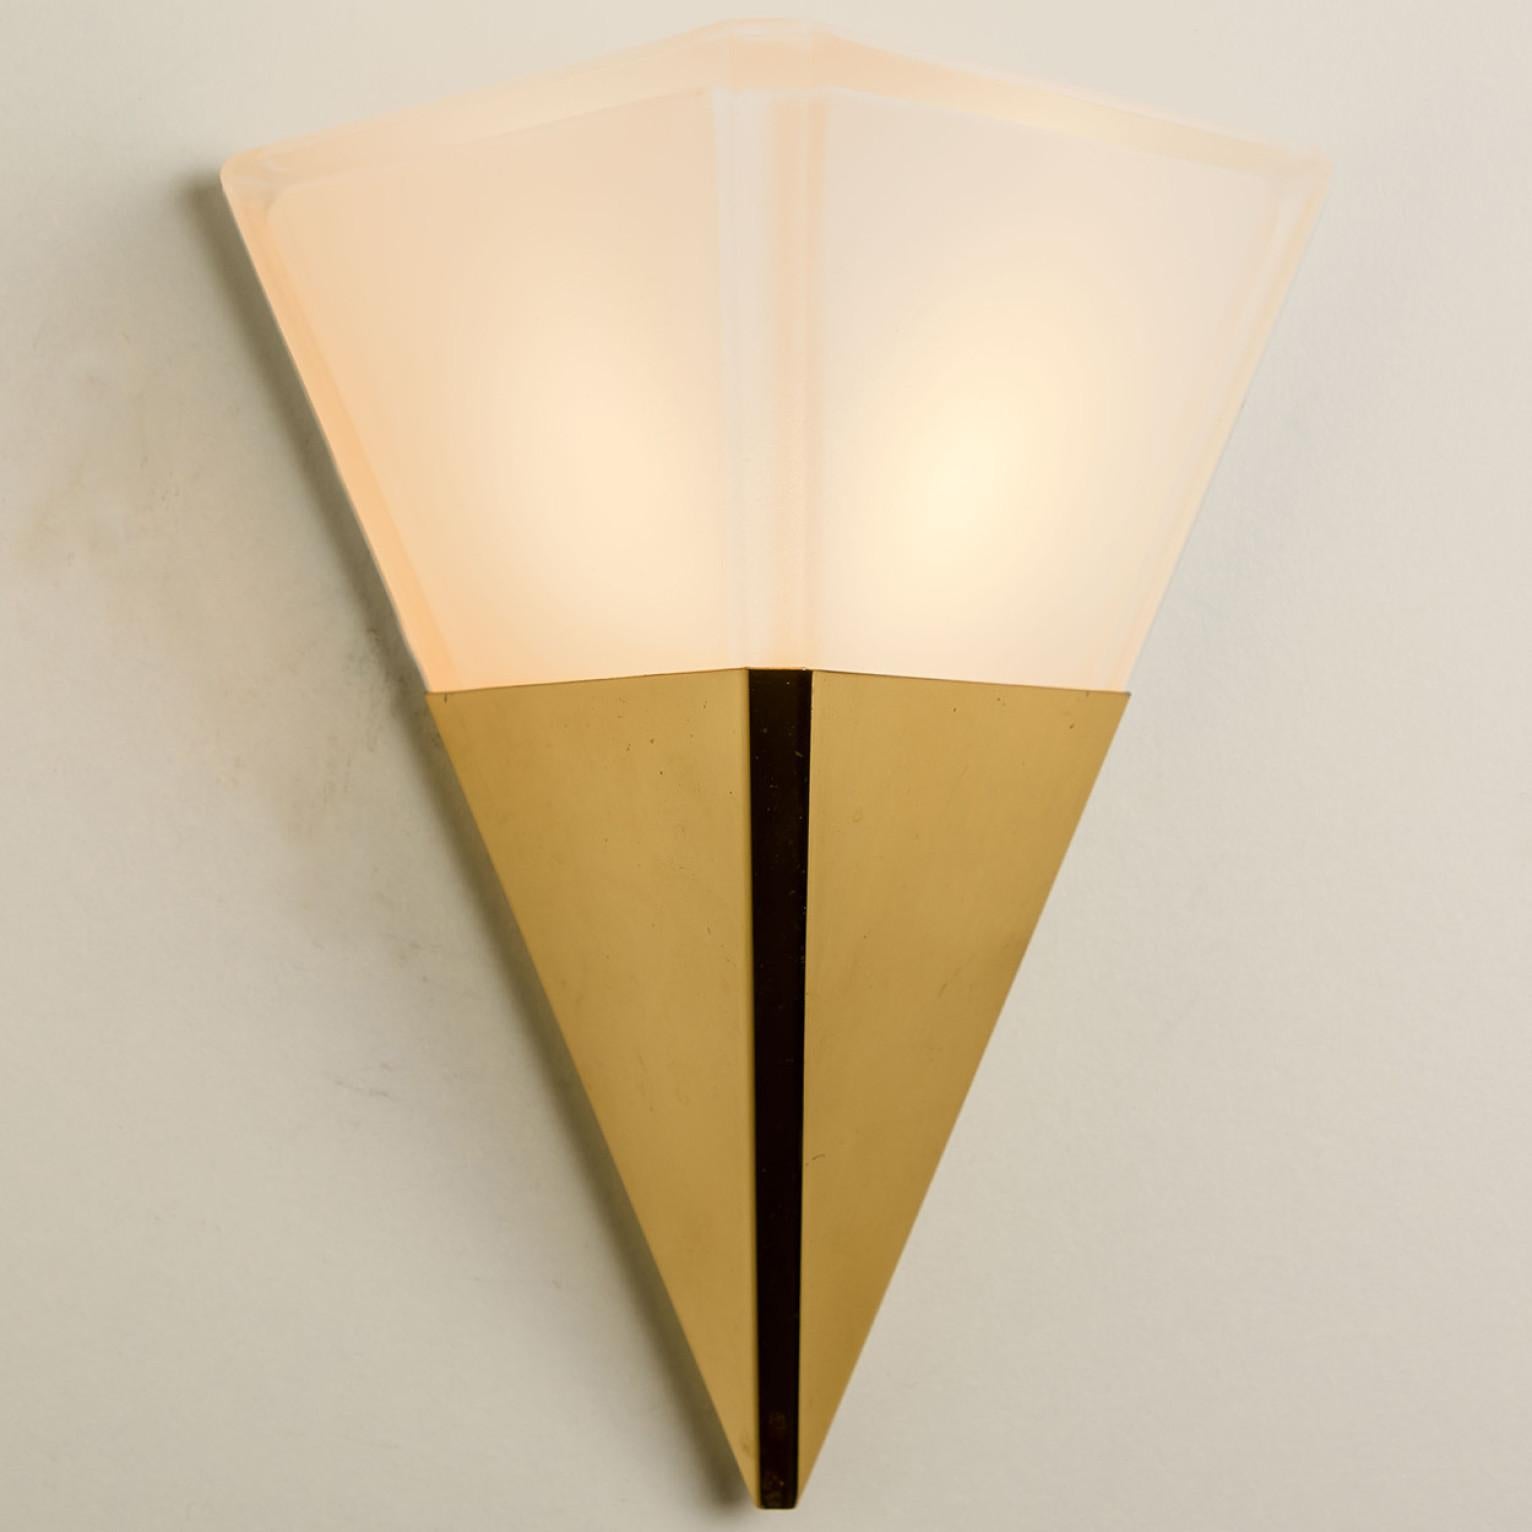 Other Pyramid Milk Glass and Brass Wall Lights by Glashütte Limburg, 1970s For Sale